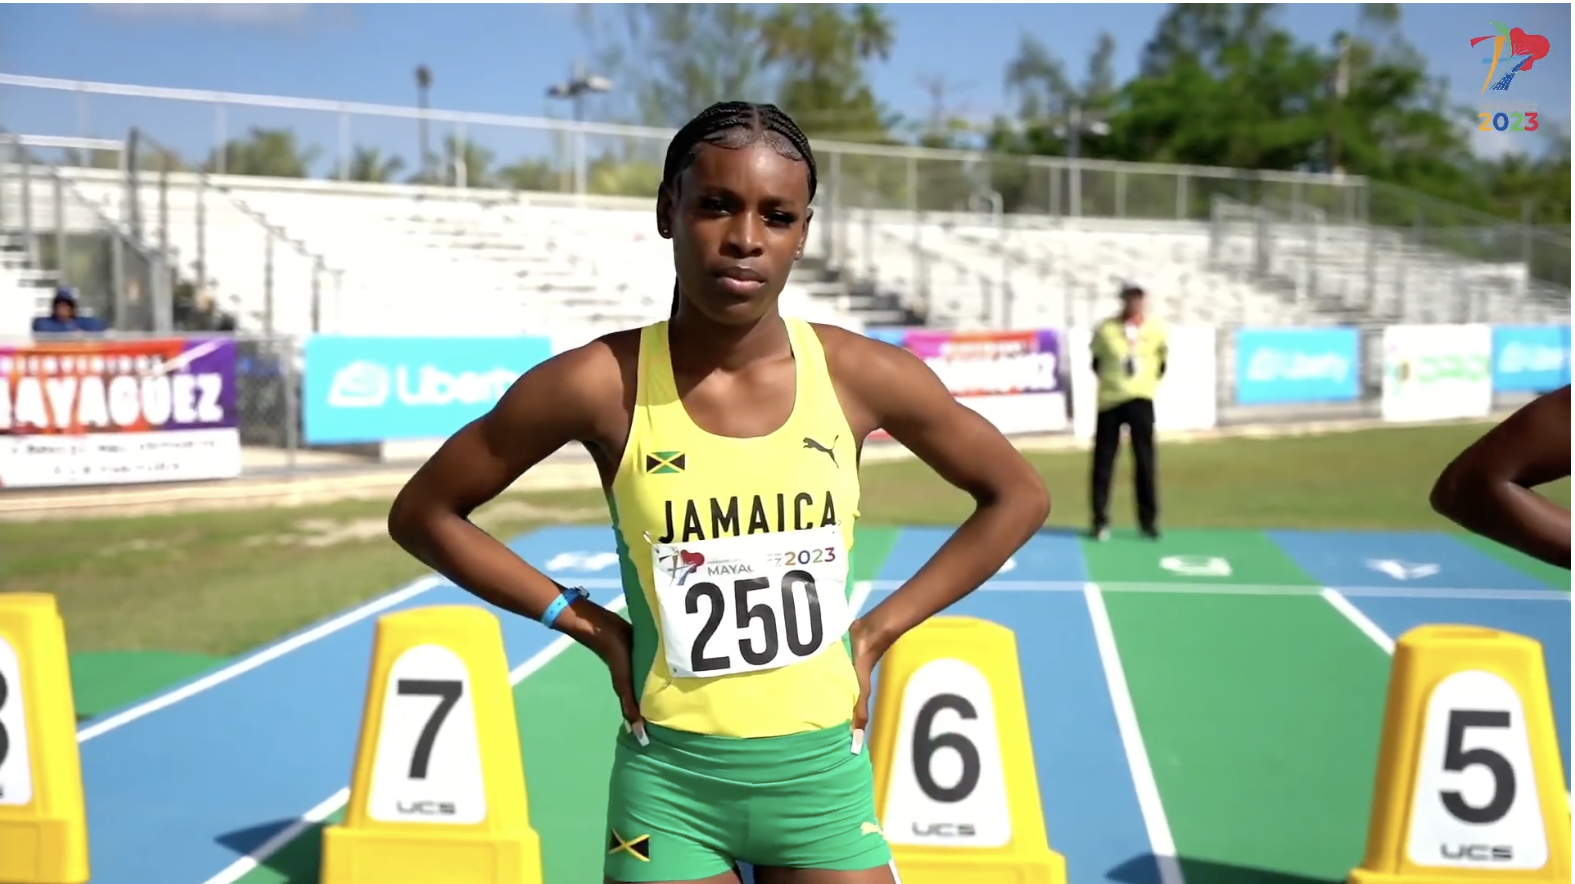 Jamaican sprinter Alana Reid confidently secured her place in the women's 100 meters final at the Pan Am U20 Championships 2023.